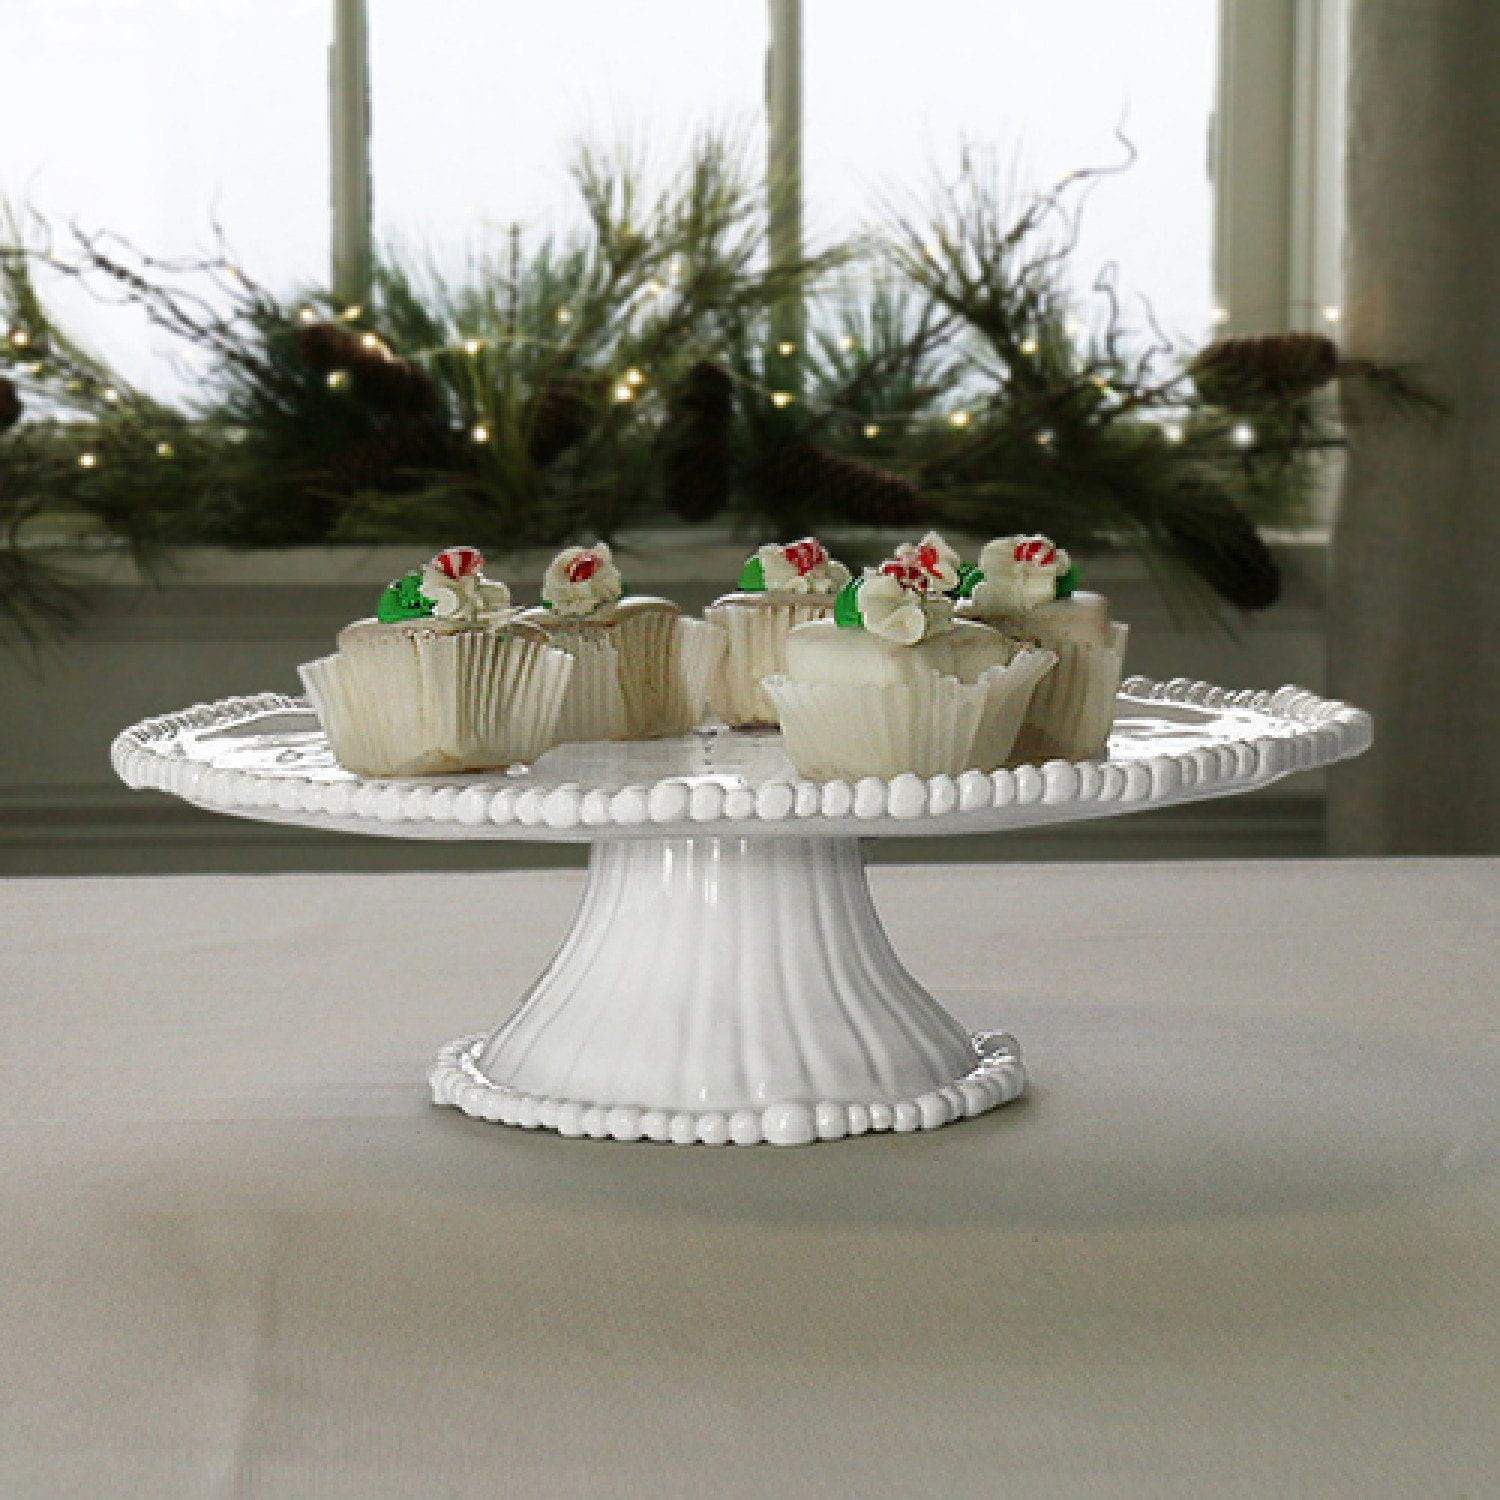 Confectionery Baking, Cake Stand Vintage, Cake Display Stand